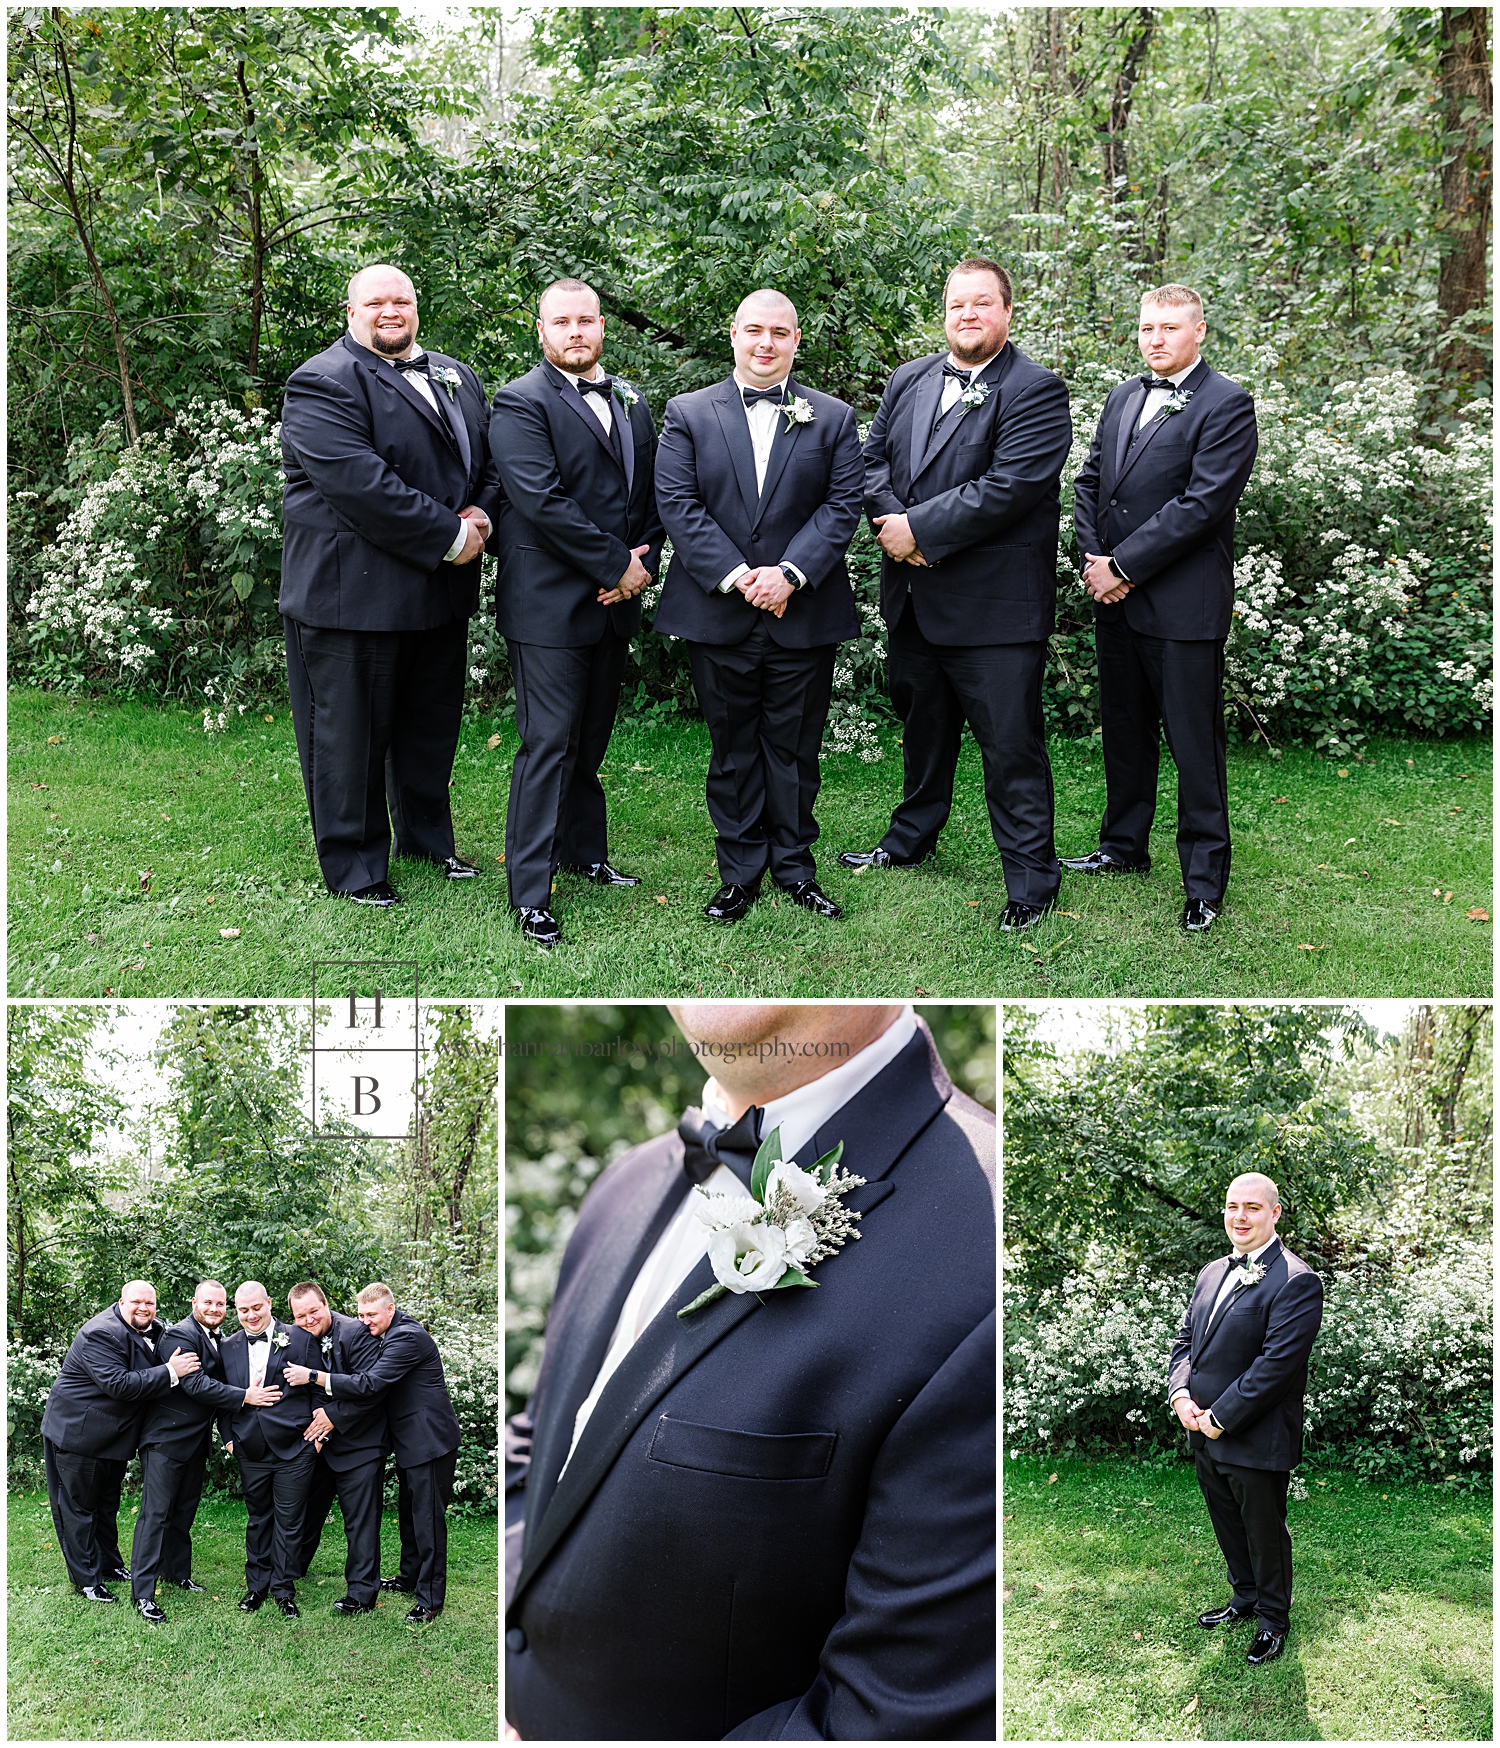 Groom and Groomsmen in black tuxes pose for photo